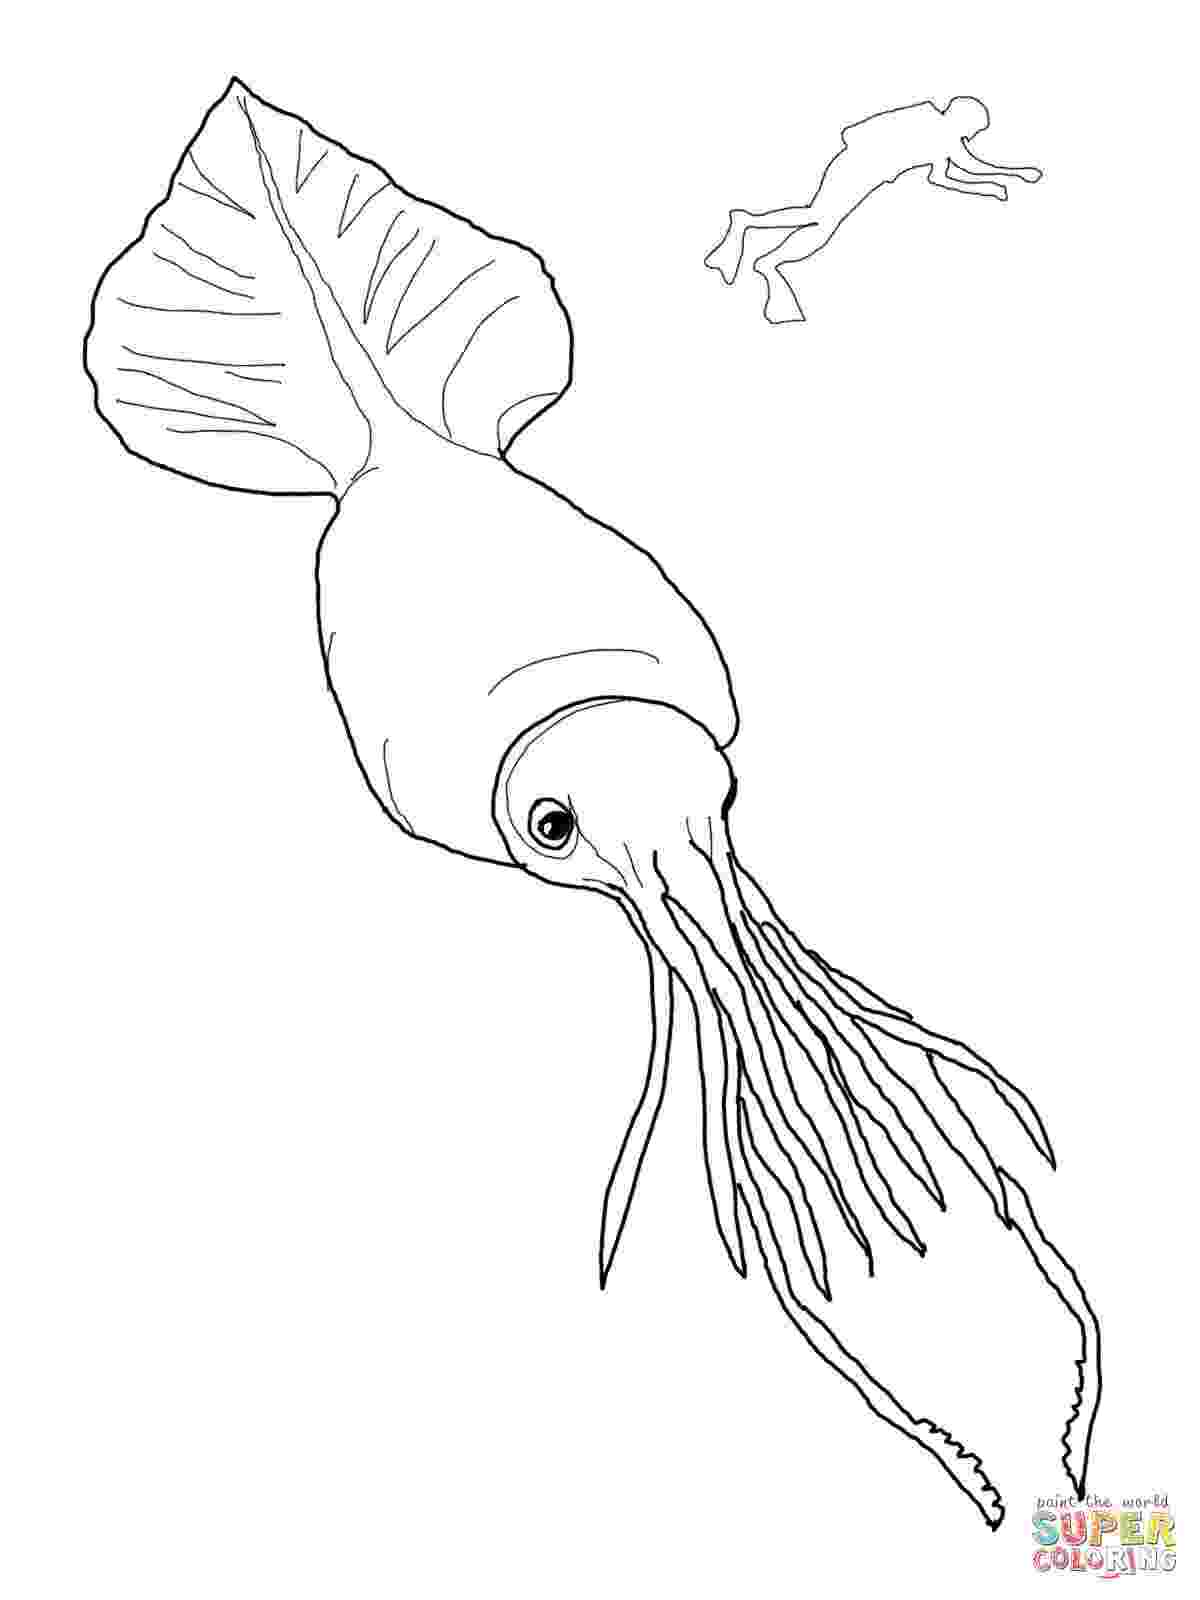 giant squid coloring page 35 squid coloring pages free coloring pages of the giant coloring giant squid page 